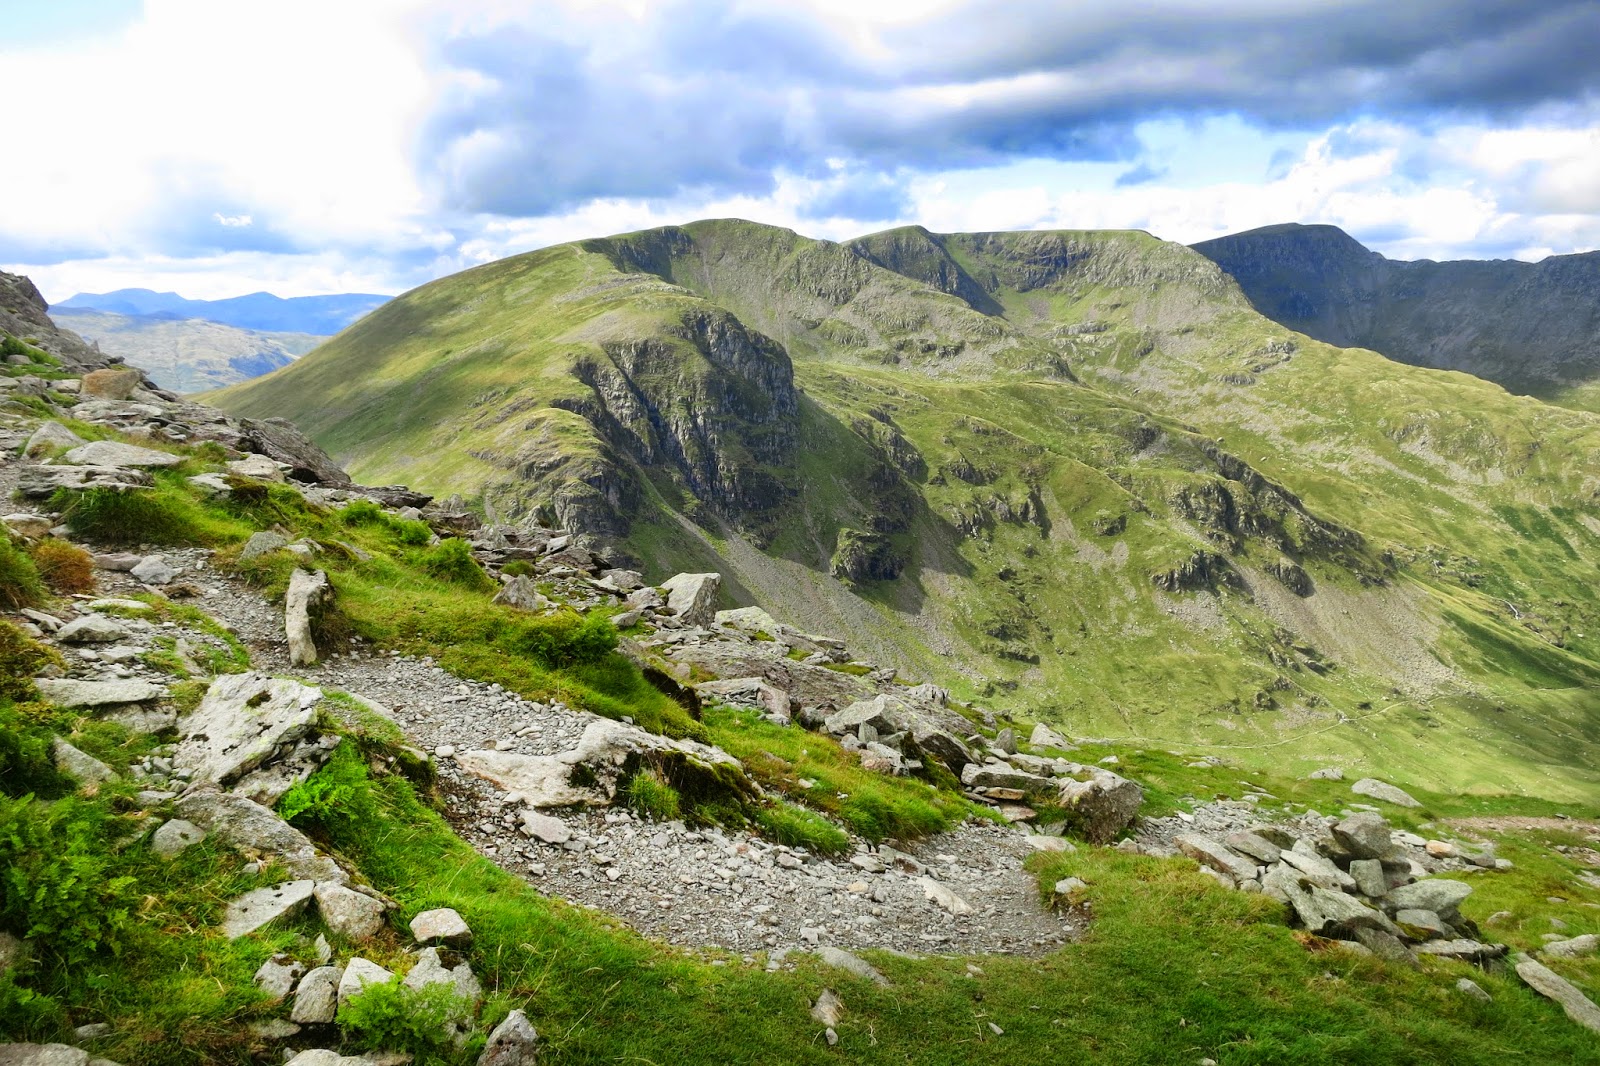 Dollywagon Pike, Nethermost Pike - with Helvellyn and striding edge in the far distance.